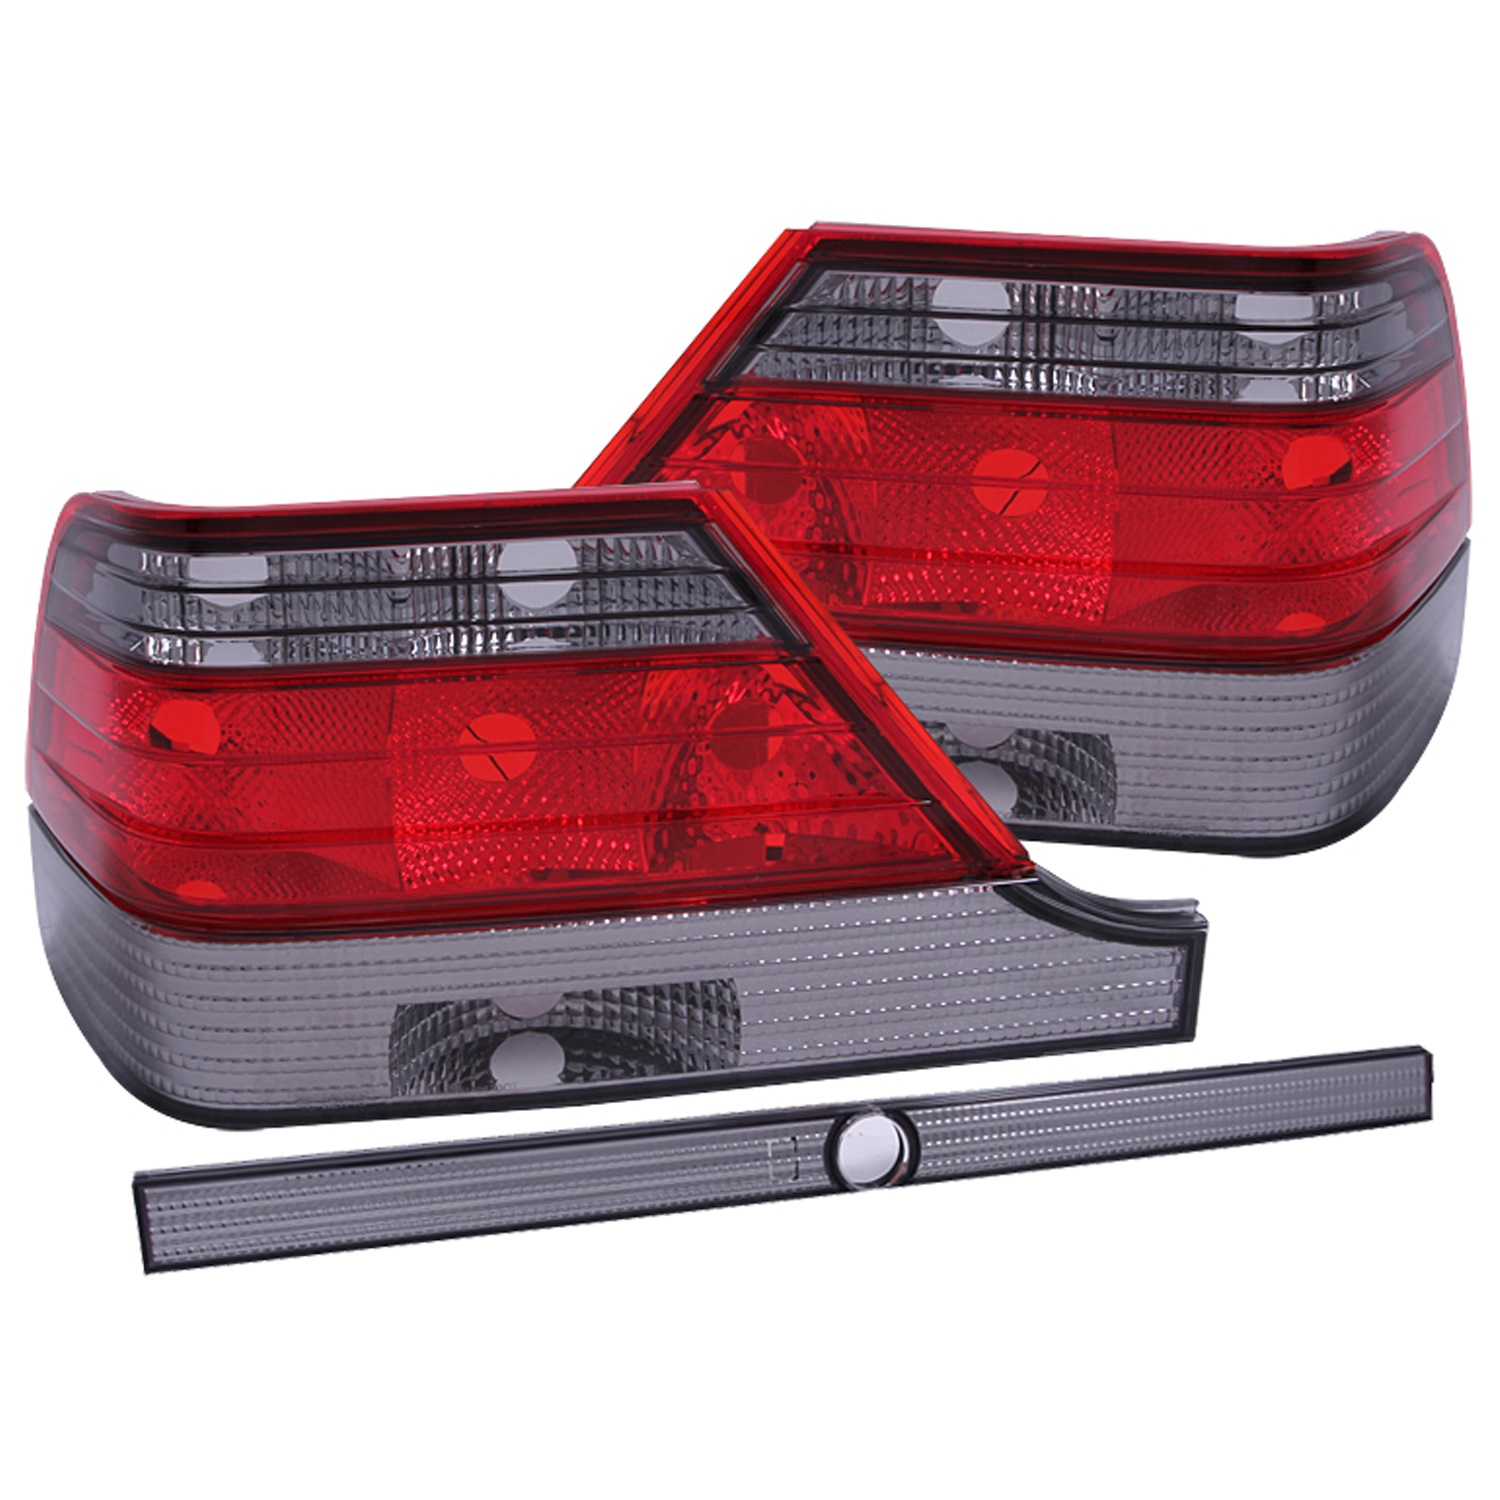 Anzo USA 221154 Tail Light Assembly Fits 97-99 S320 S420 S500 S600